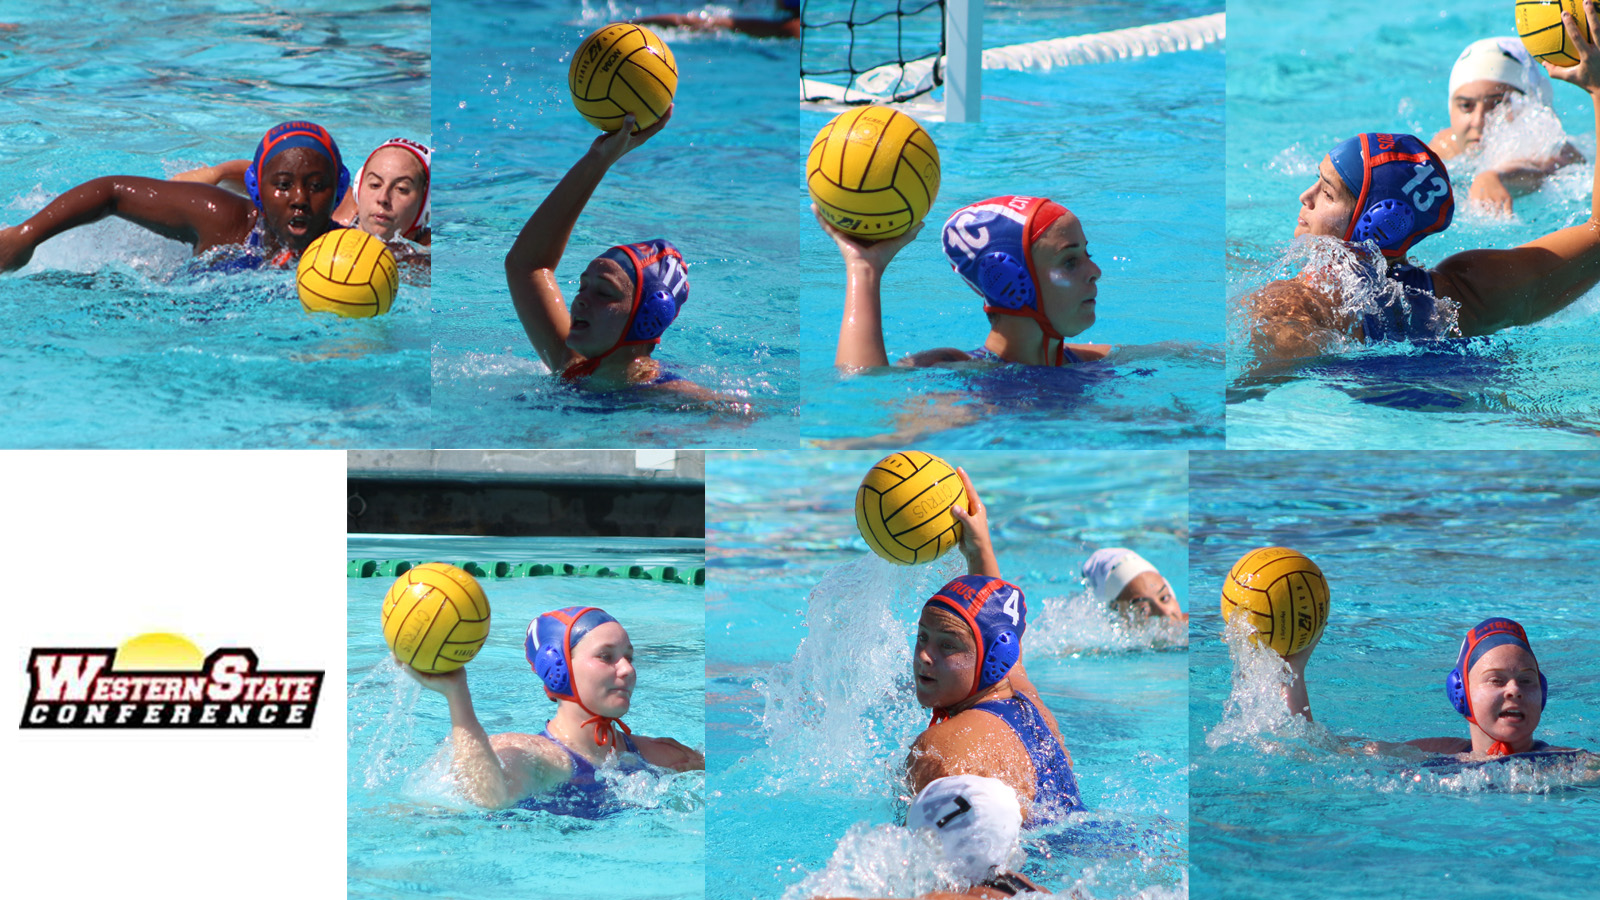 Seven Citrus College women’s water polo players grabbed spots on the All-Western State Conference Team after helping the Owls advance to the SoCal Regionals quarterfinals.